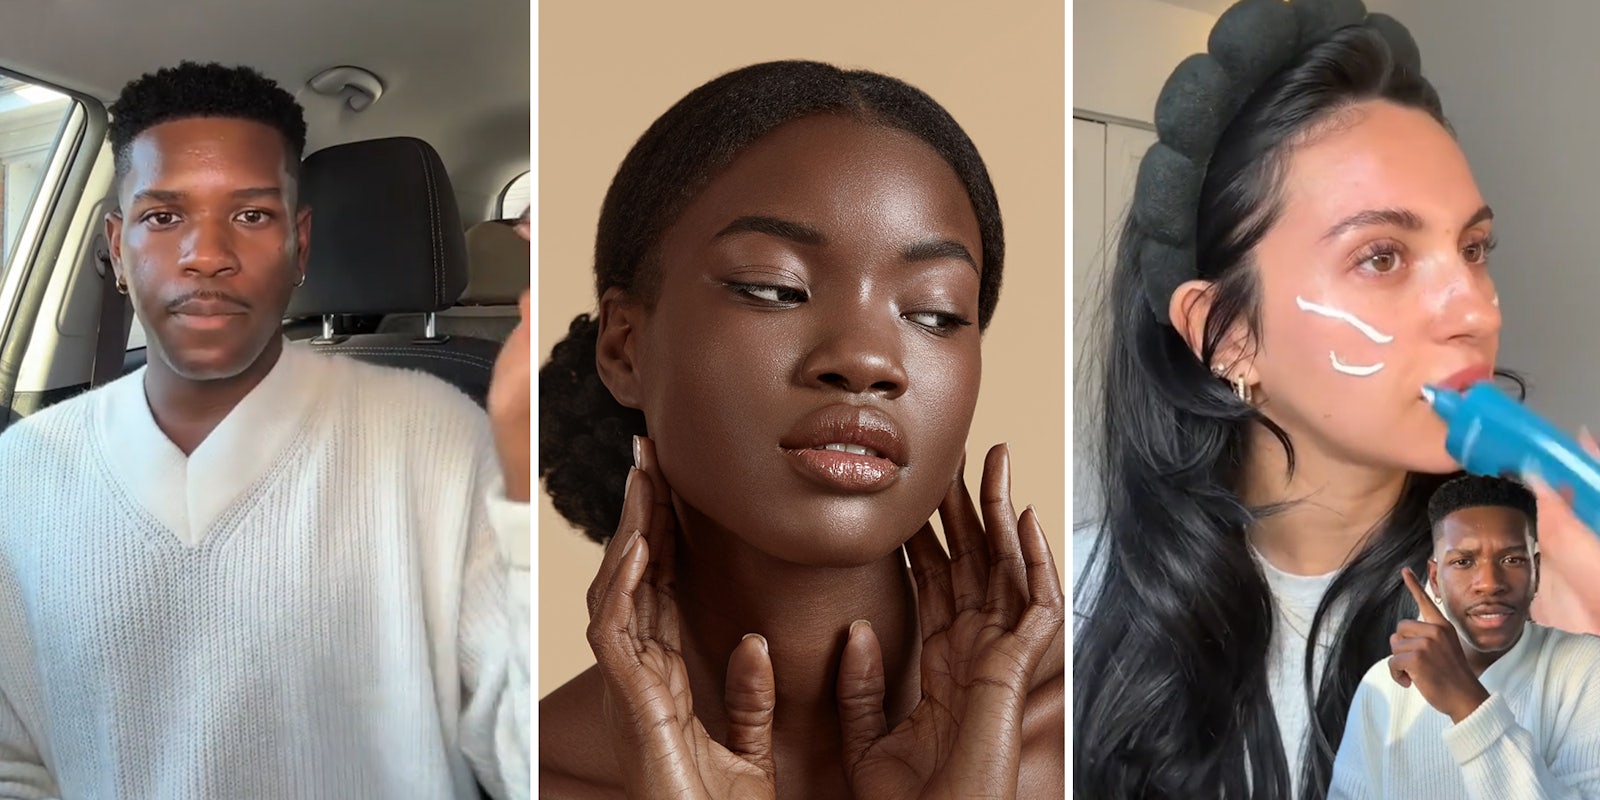 Black skincare influencer tests out viral color-adapting sunscreen.